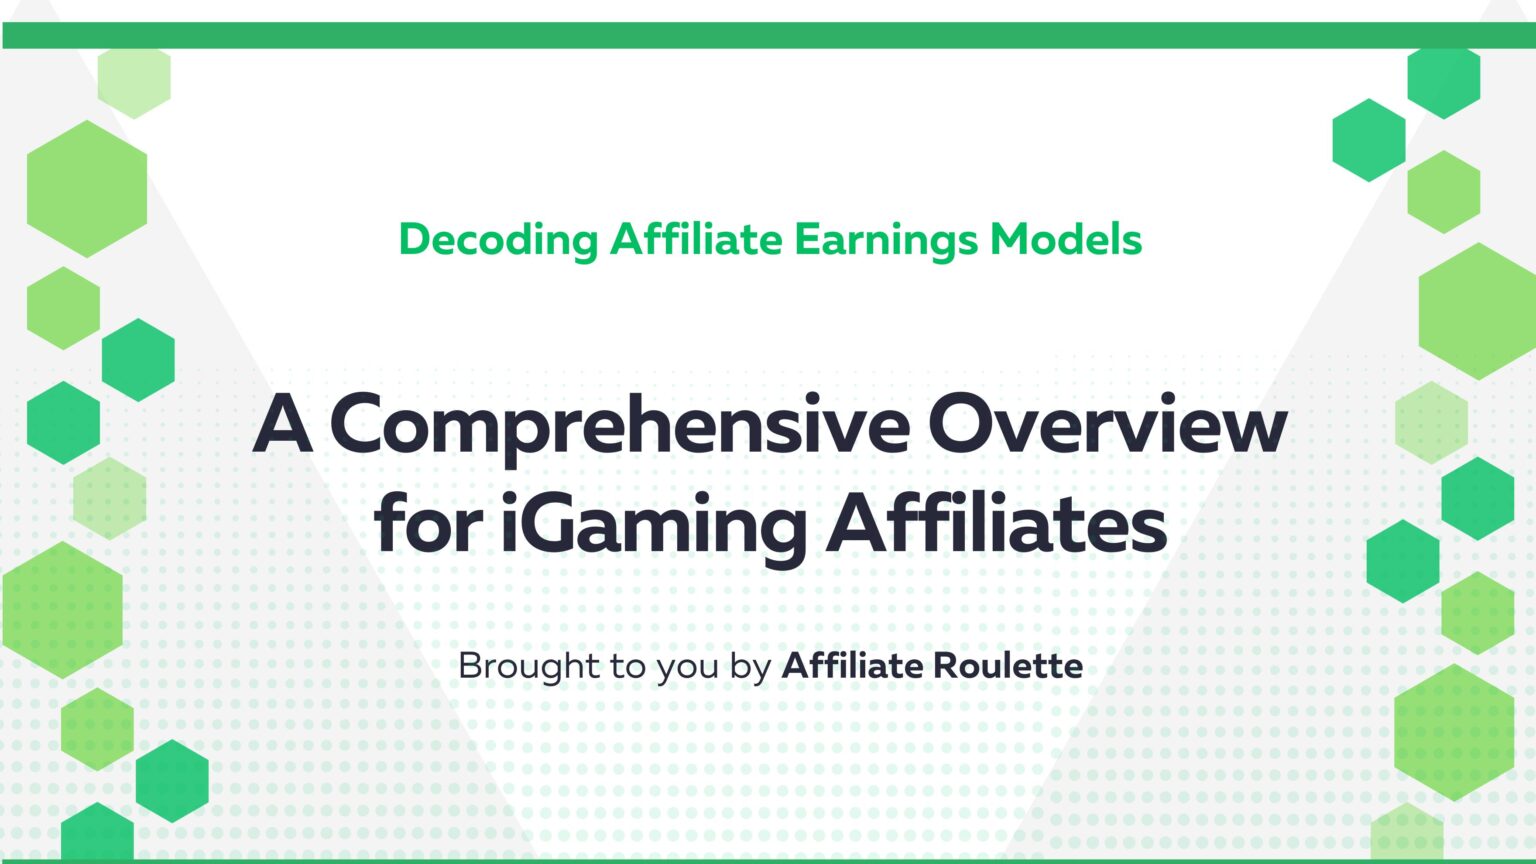 Decoding Affiliate Earnings Models: A Comprehensive Overview for iGaming Affiliates